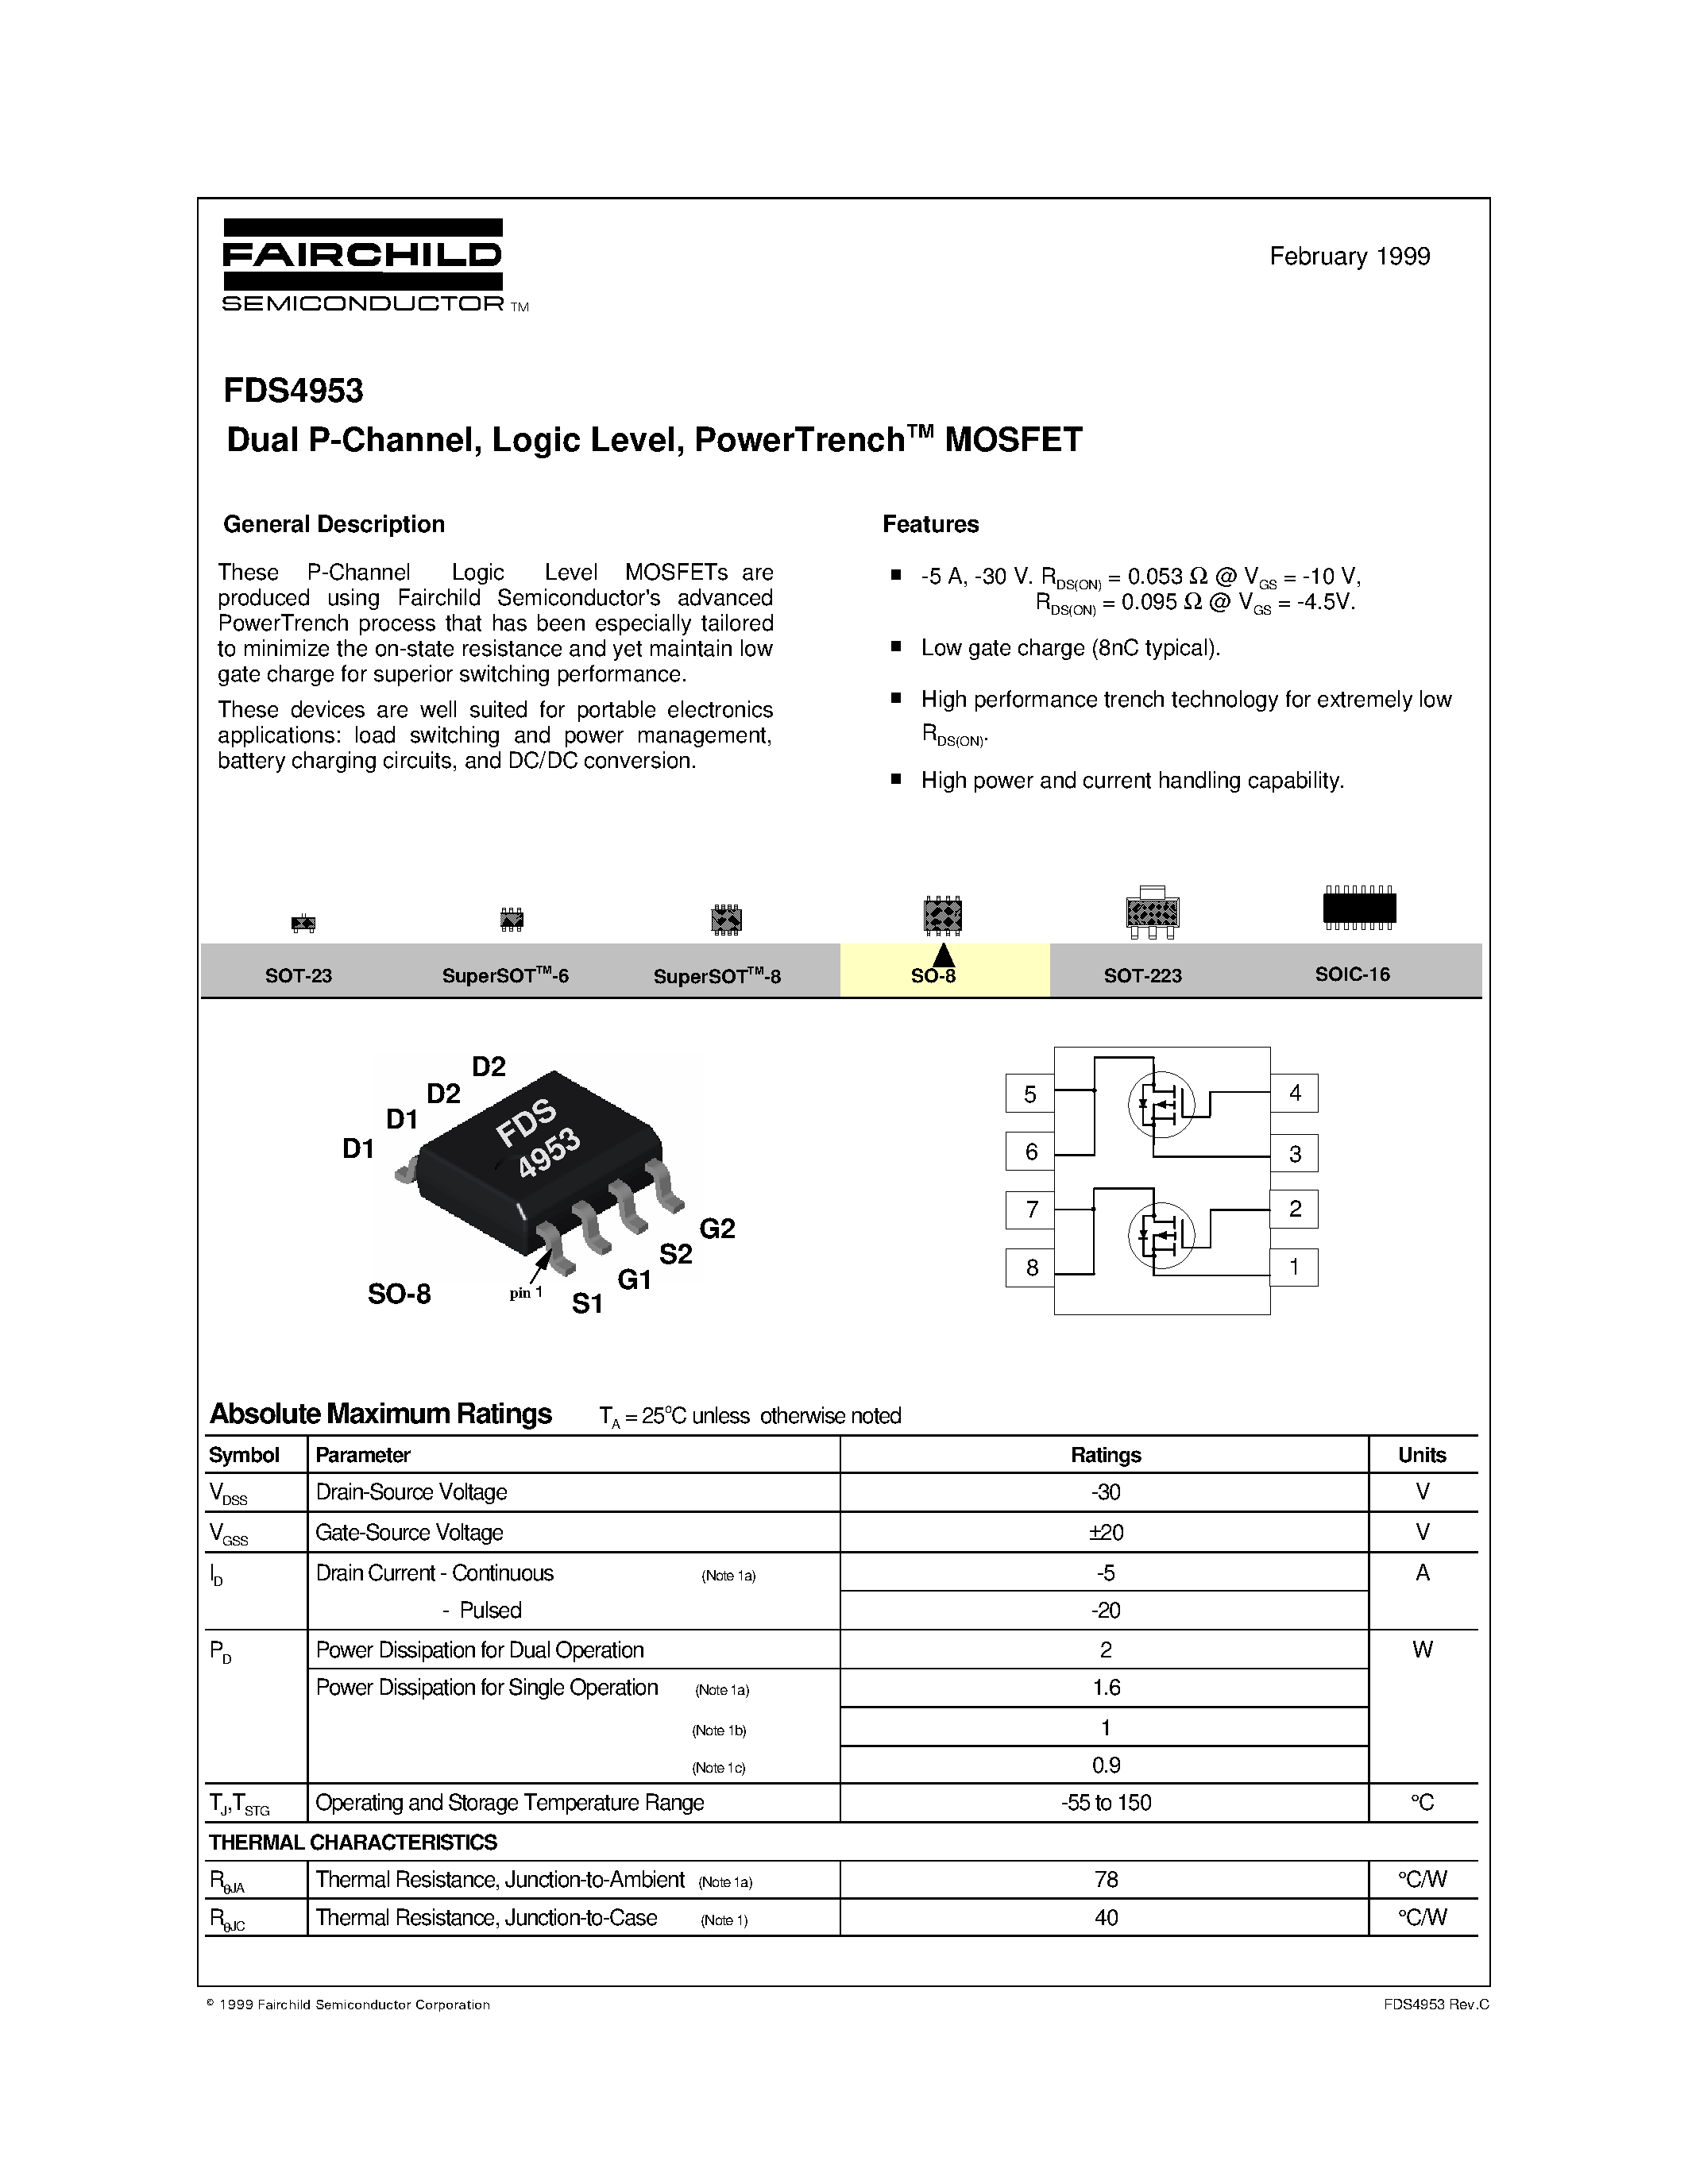 Даташит FDS4953 - Dual P-Channel/ Logic Level/ PowerTrenchTM MOSFET страница 1